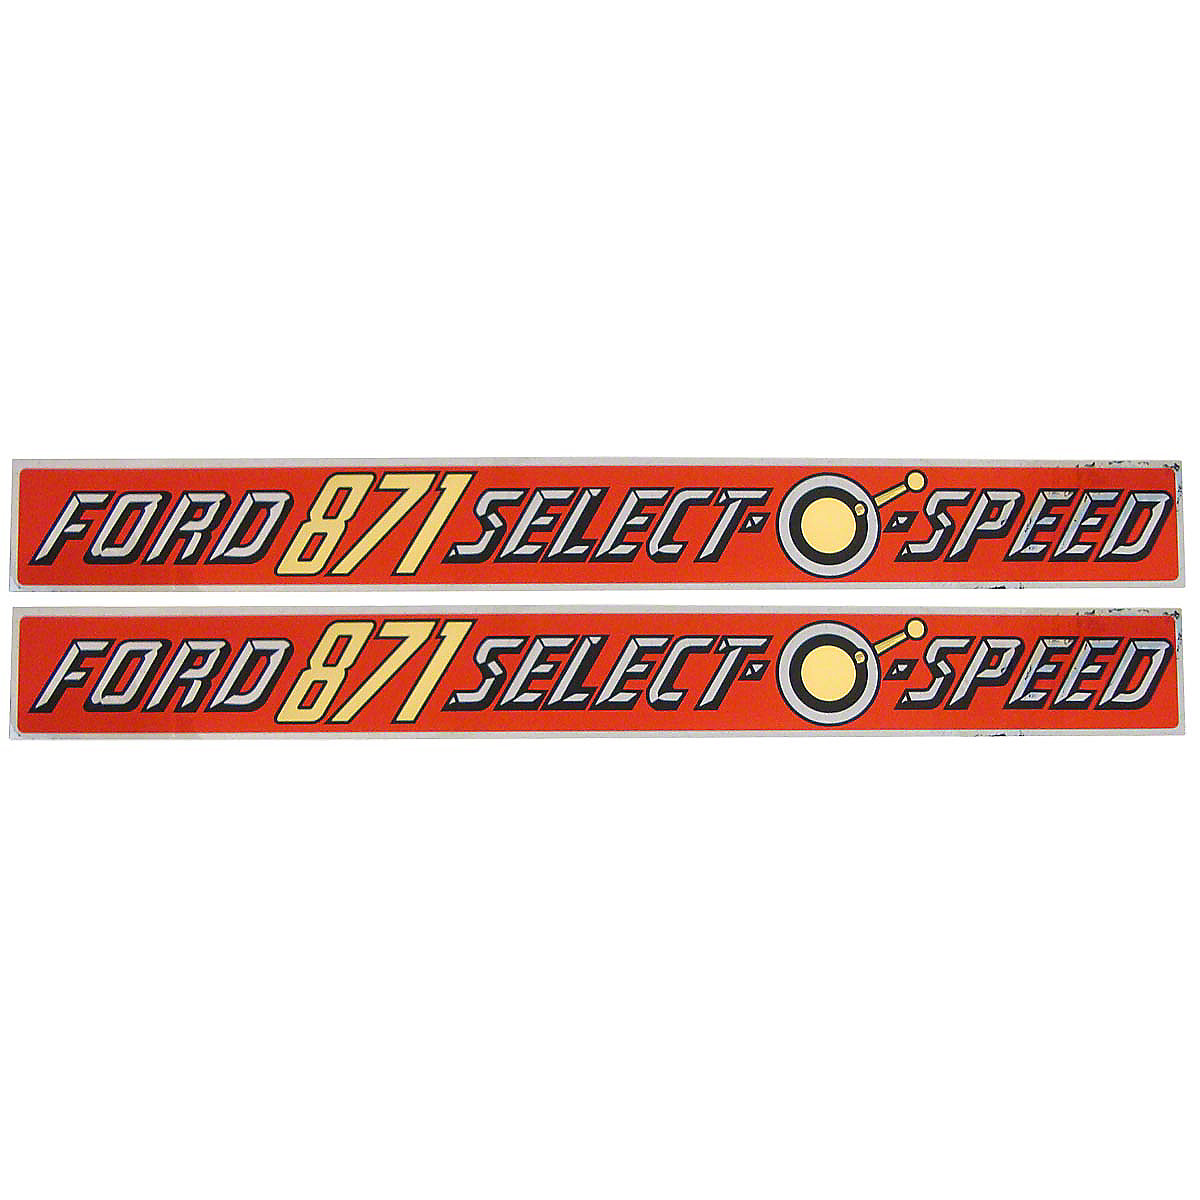 UF81590    Hood Decal Pair  871 Select-O-Speed